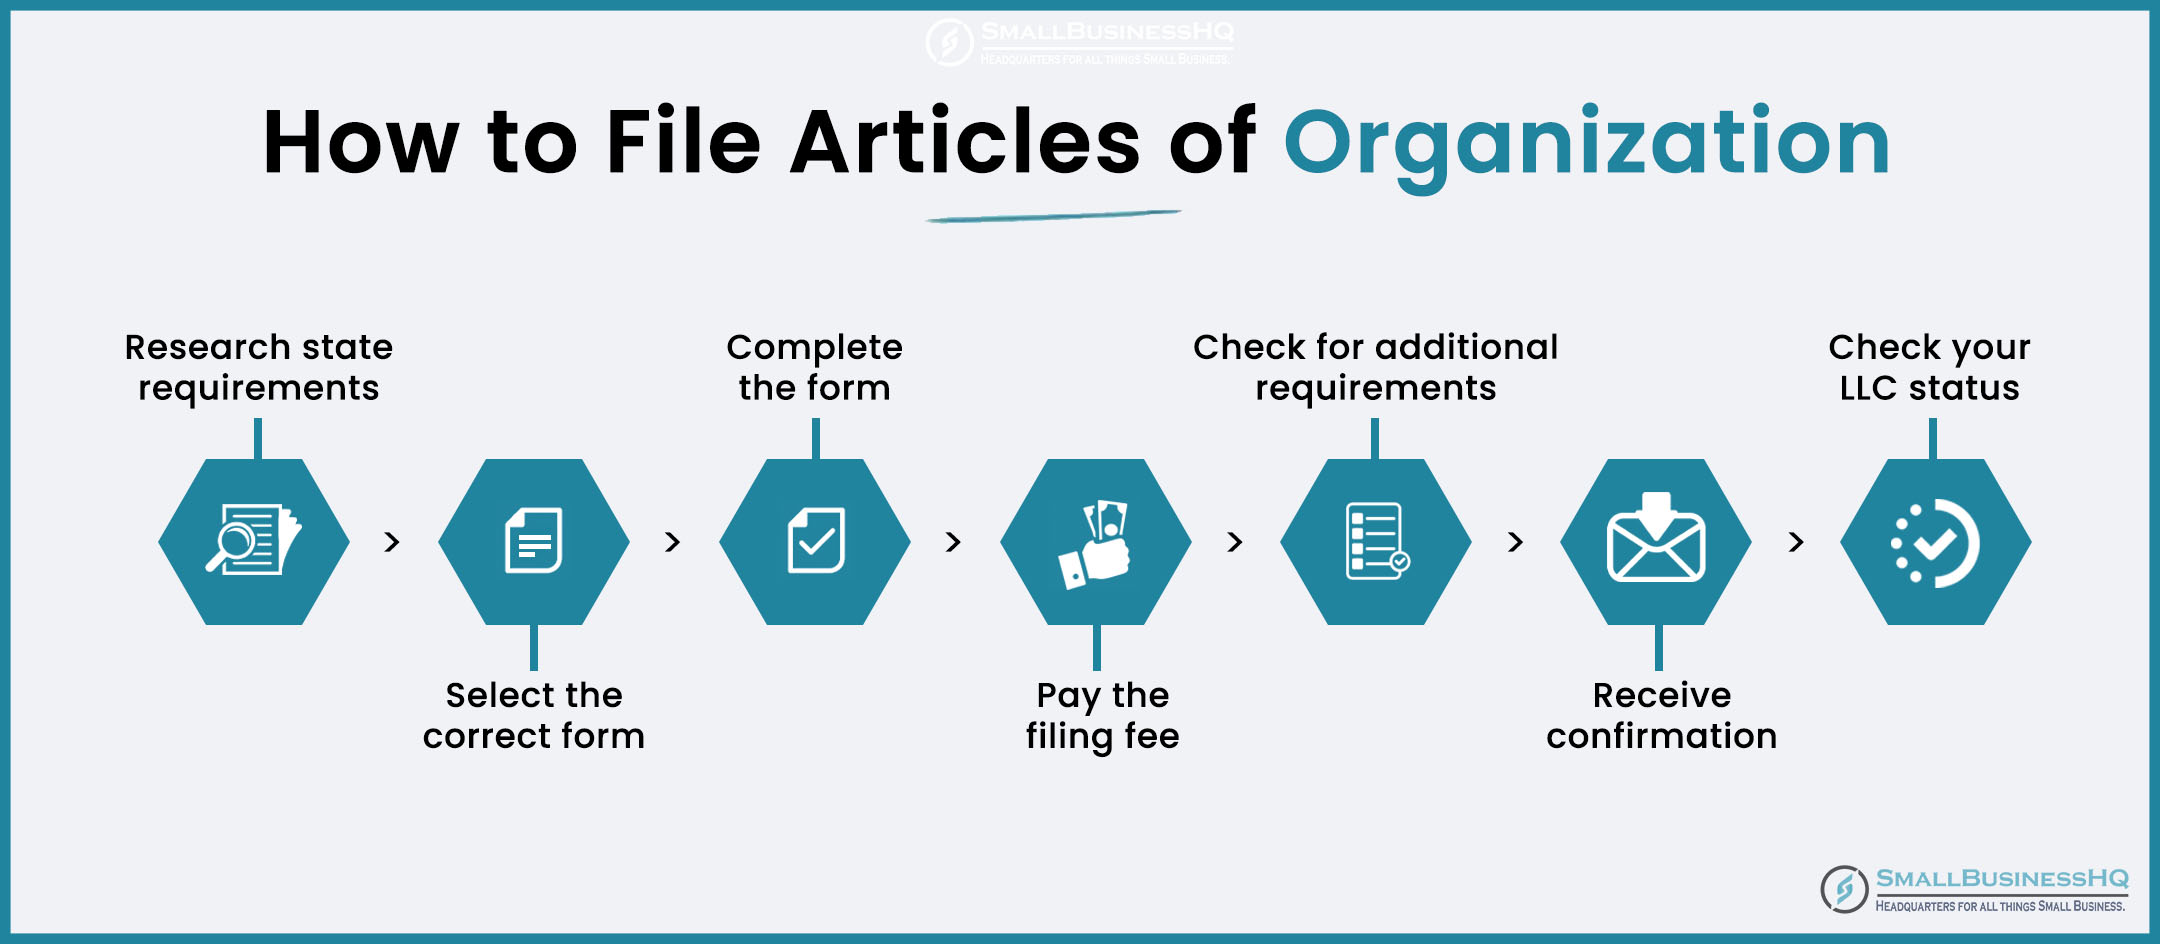 How to File Articles of Organization1